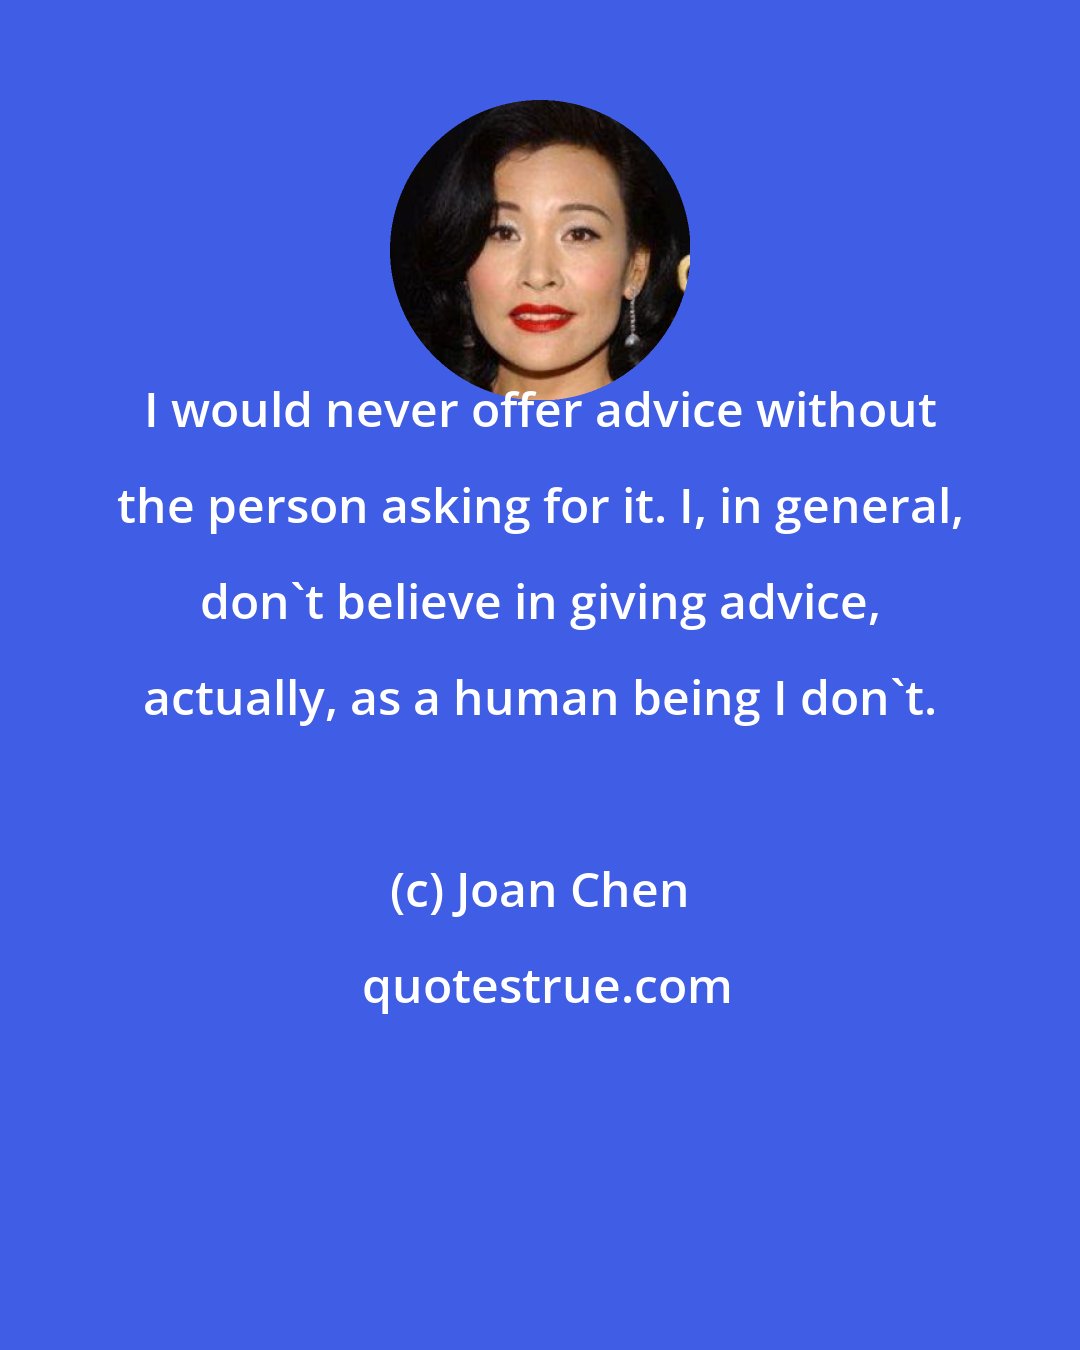 Joan Chen: I would never offer advice without the person asking for it. I, in general, don't believe in giving advice, actually, as a human being I don't.